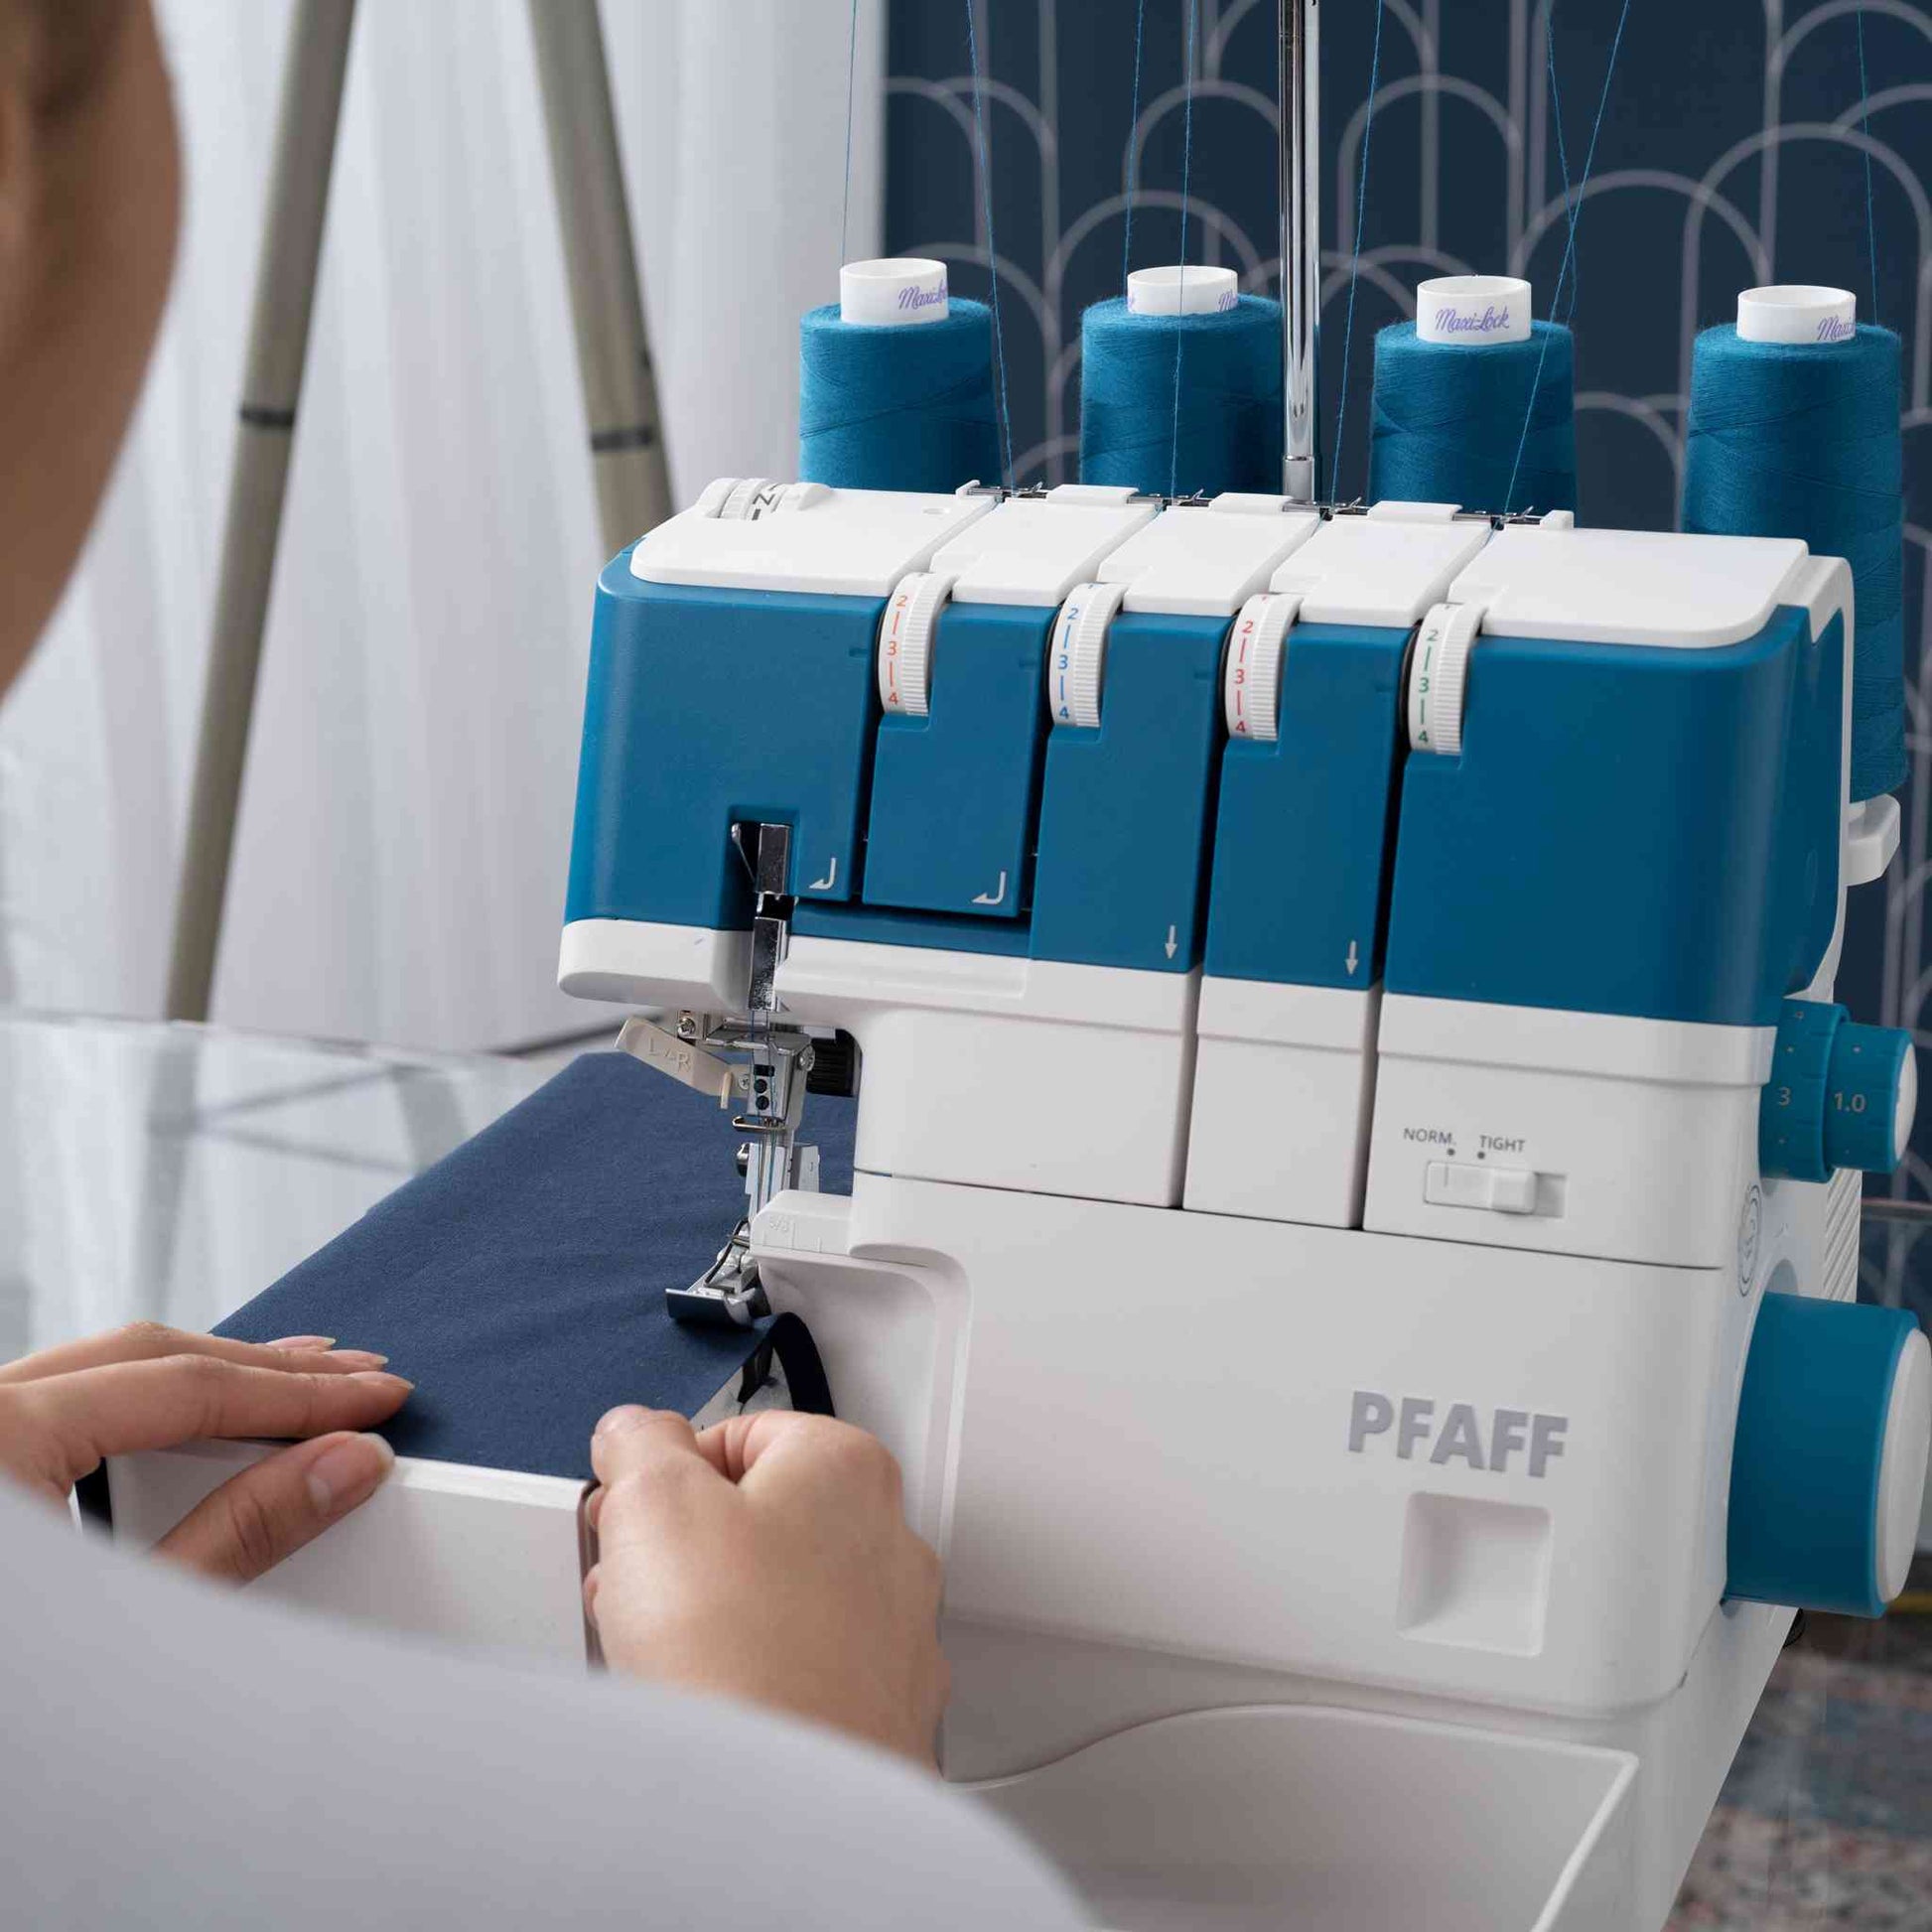 Pfaff Admire Air 5000 overlocker / serger air threading machine sewing from the front.